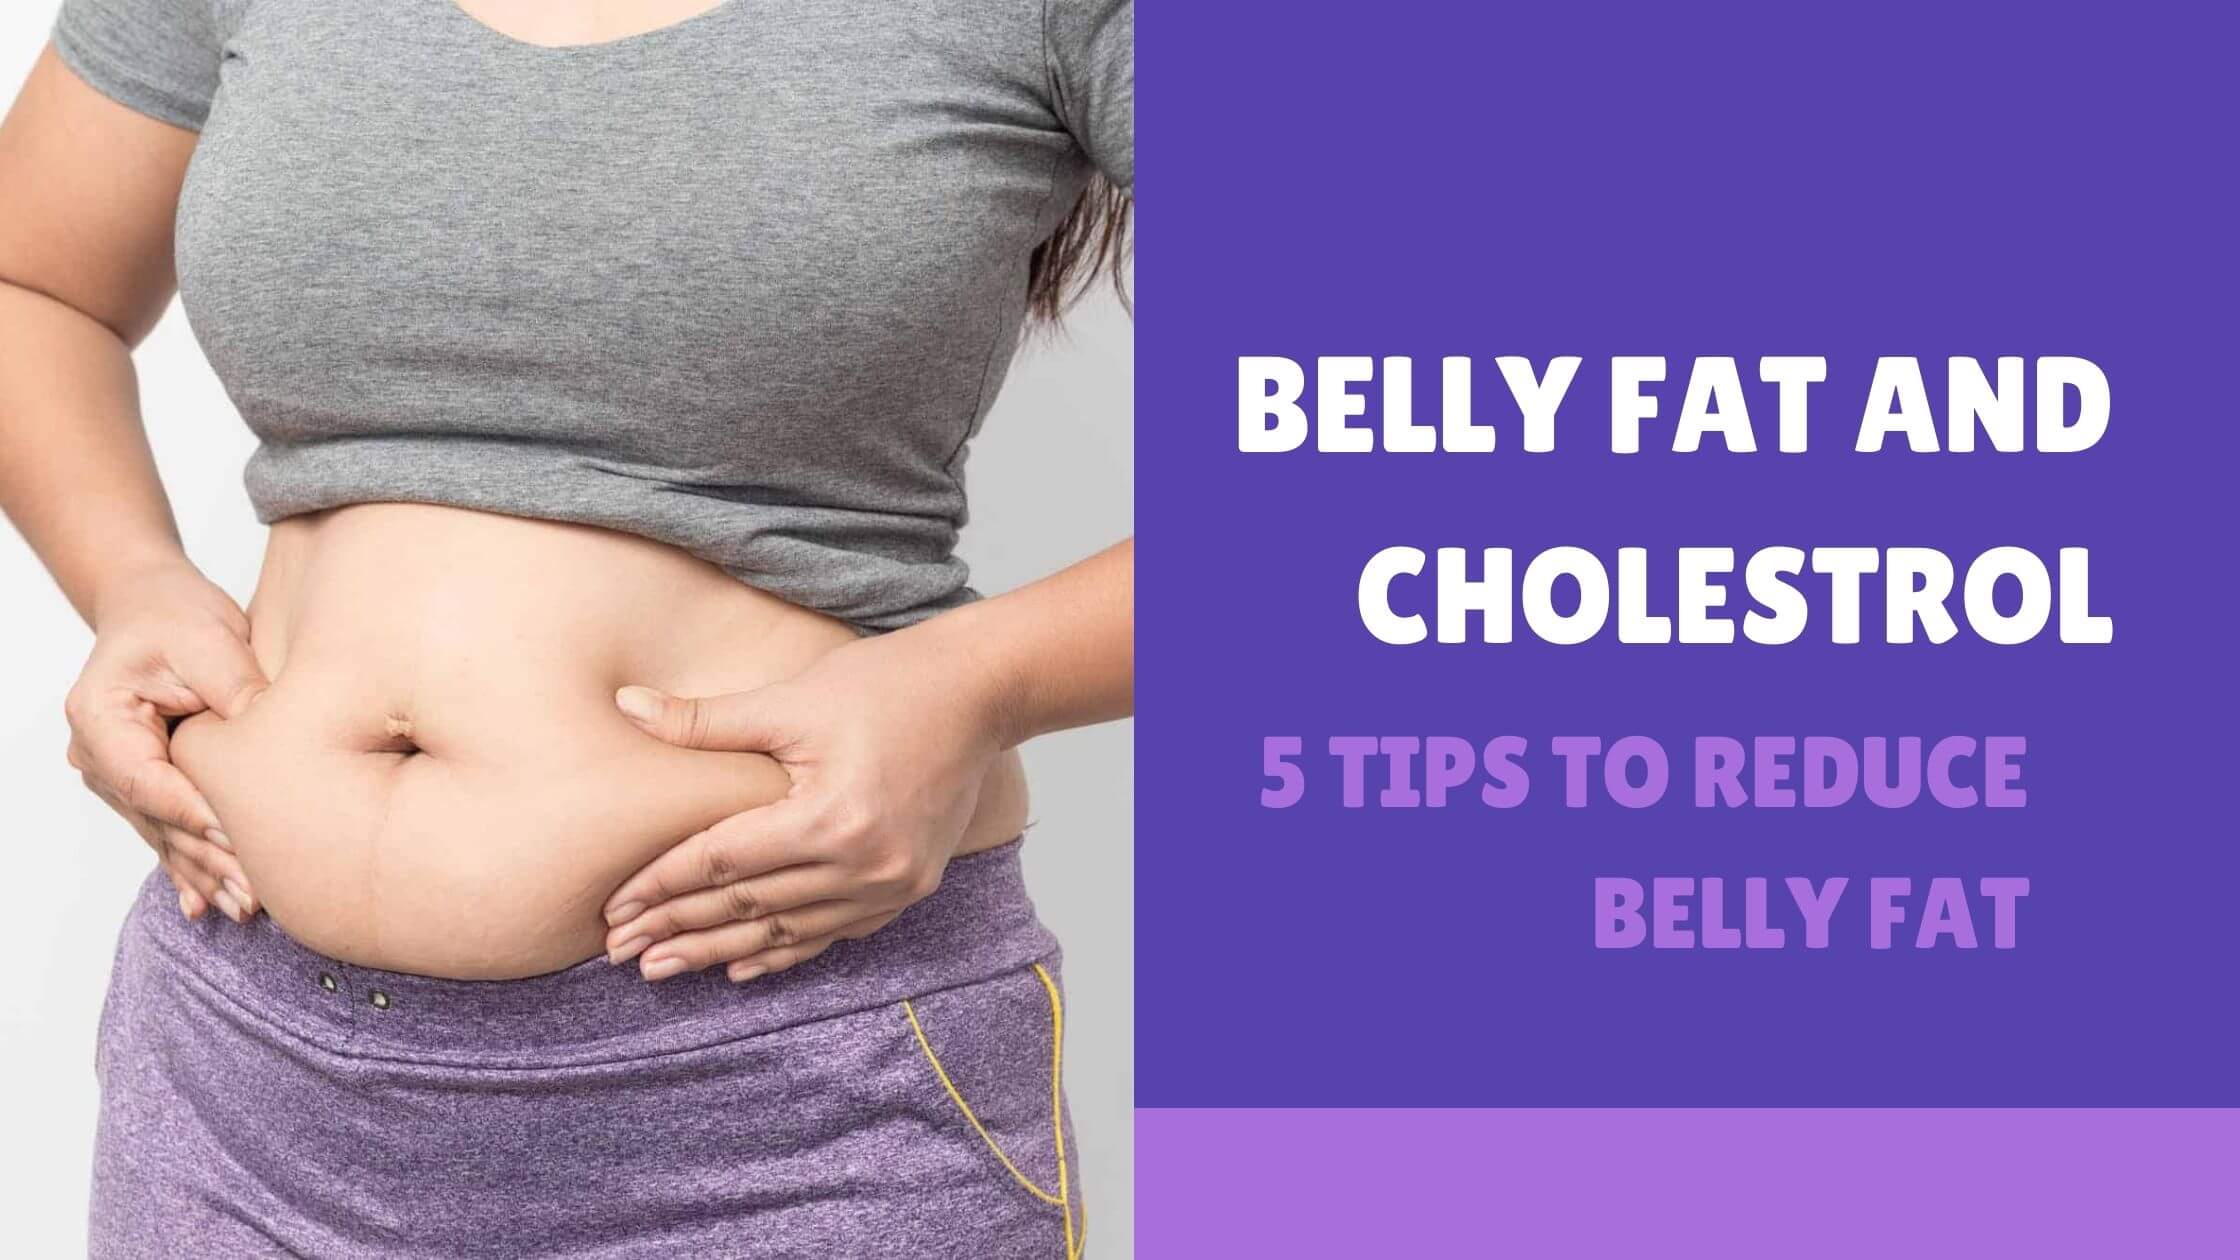 How Can I Reduce My Belly Fat And Cholesterol Quickly Just Do These 5 Tips